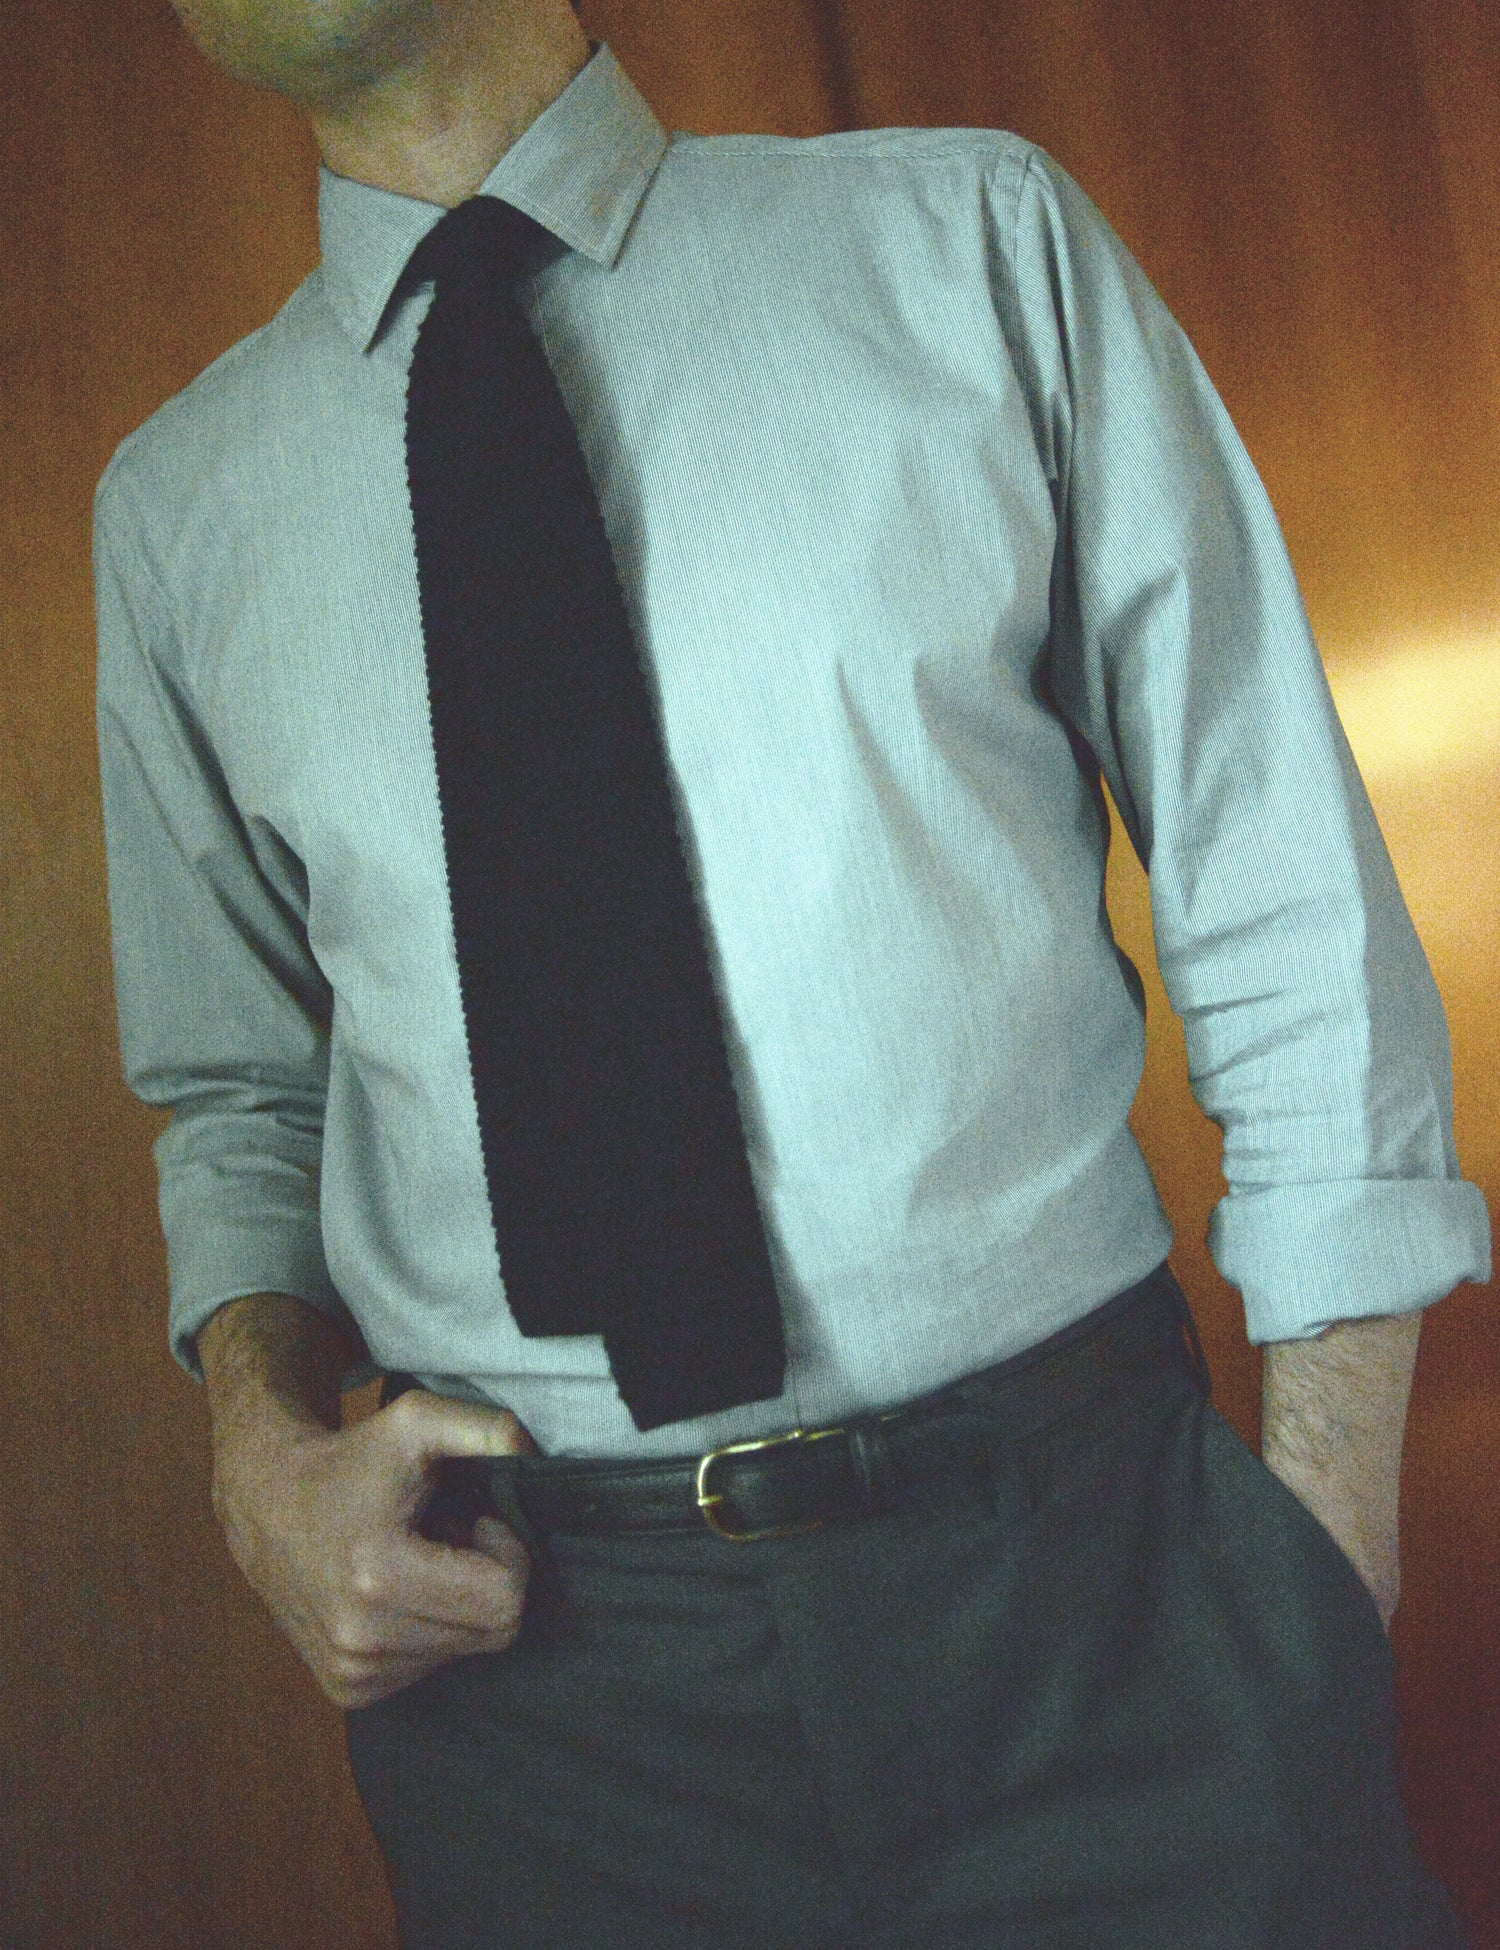 Photo of Brooklyn Tailors x Saddler's 25mm Belt in Grain Leather - Black on body. The model is wearing a dress shirt, suit trousers, and a knit tie. 